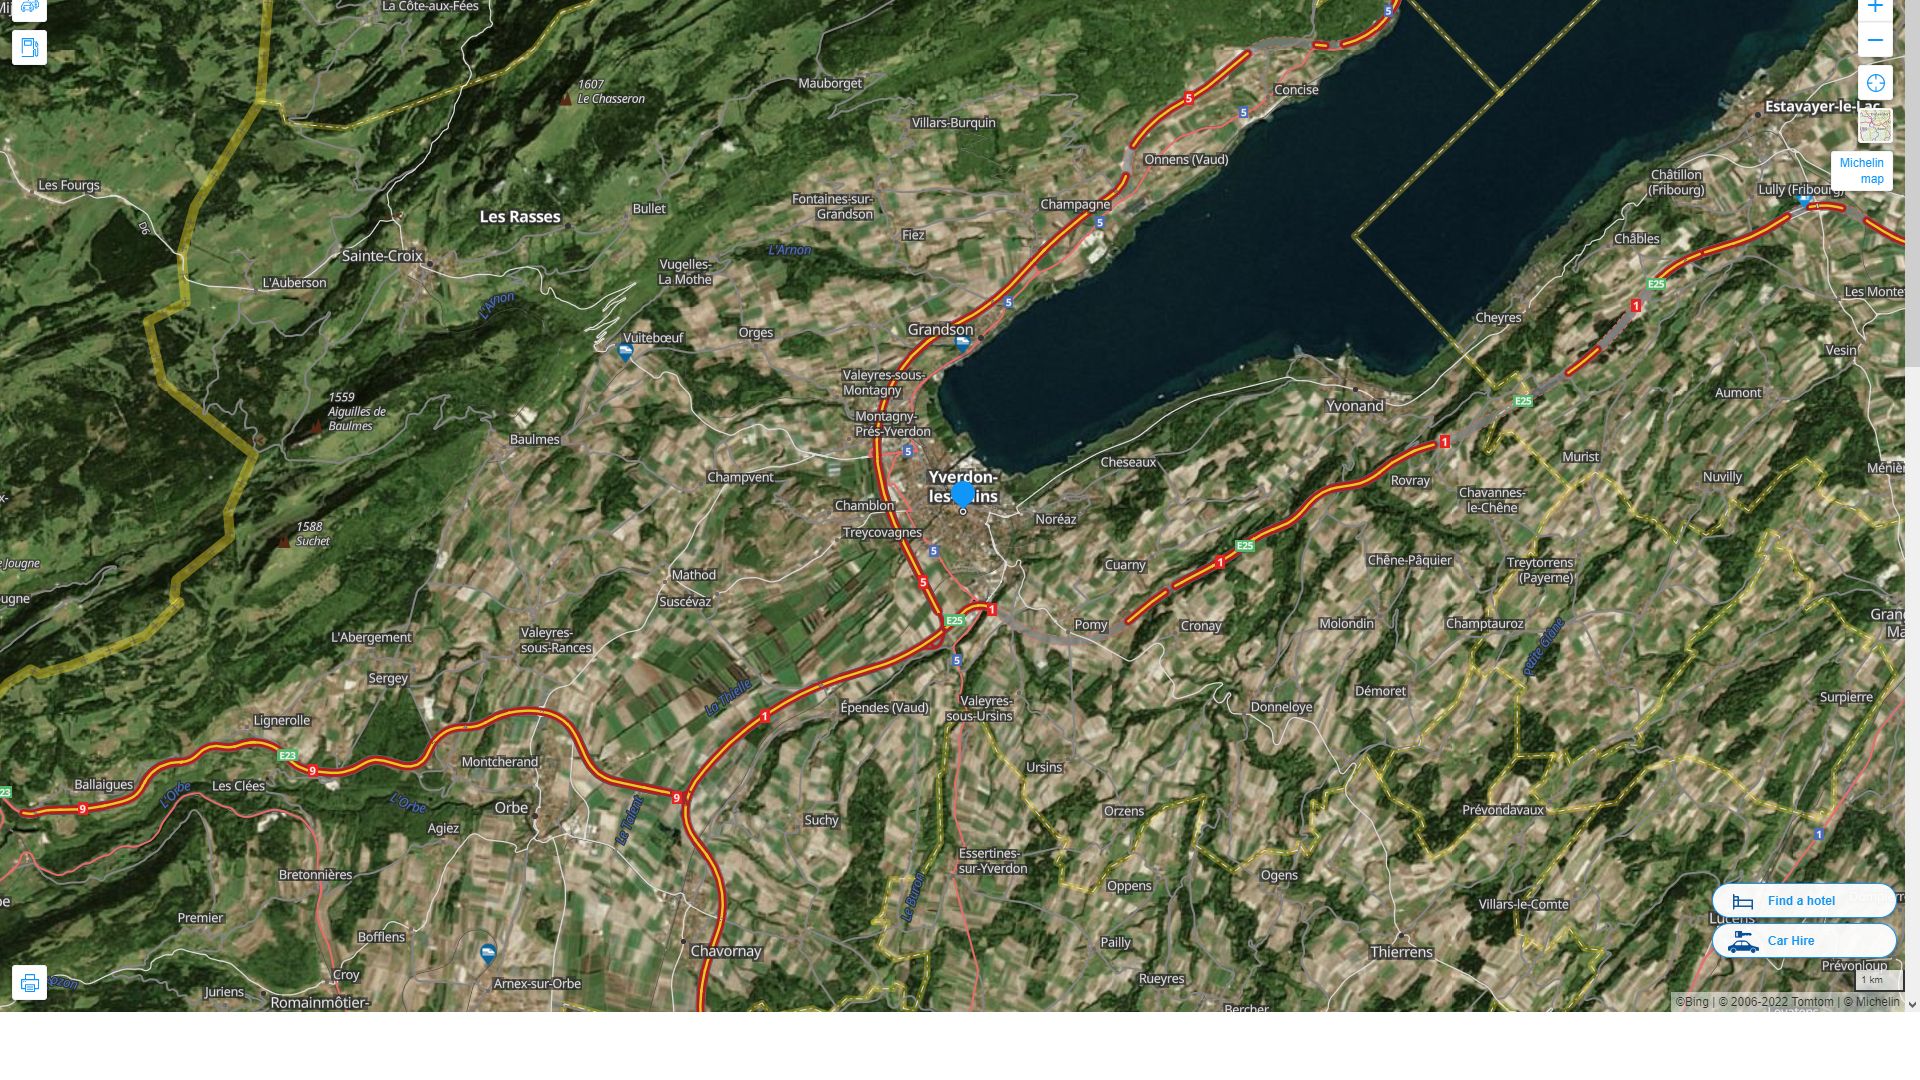 Yverdon les Bains Highway and Road Map with Satellite View